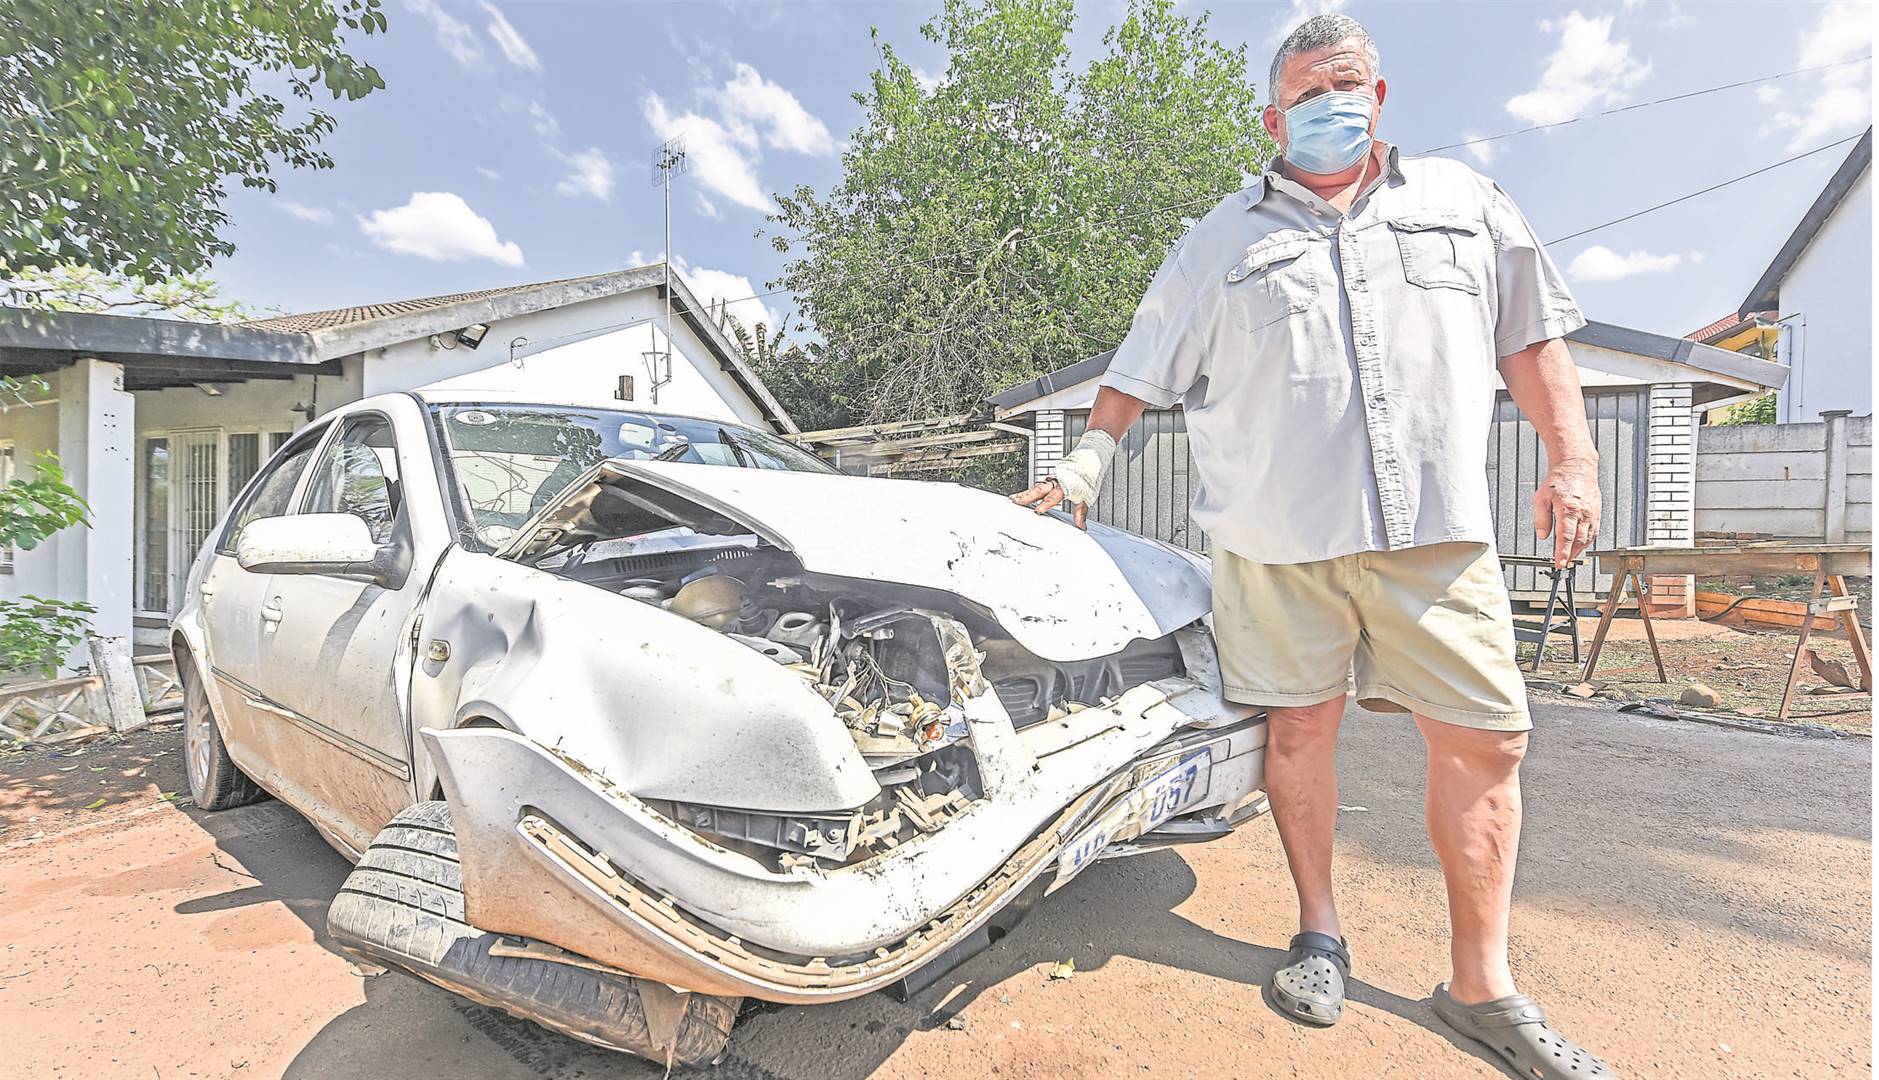 Scottsville resident Michael Stening-Smith standing next to his car, which was written off after the accident in Slangspruit.